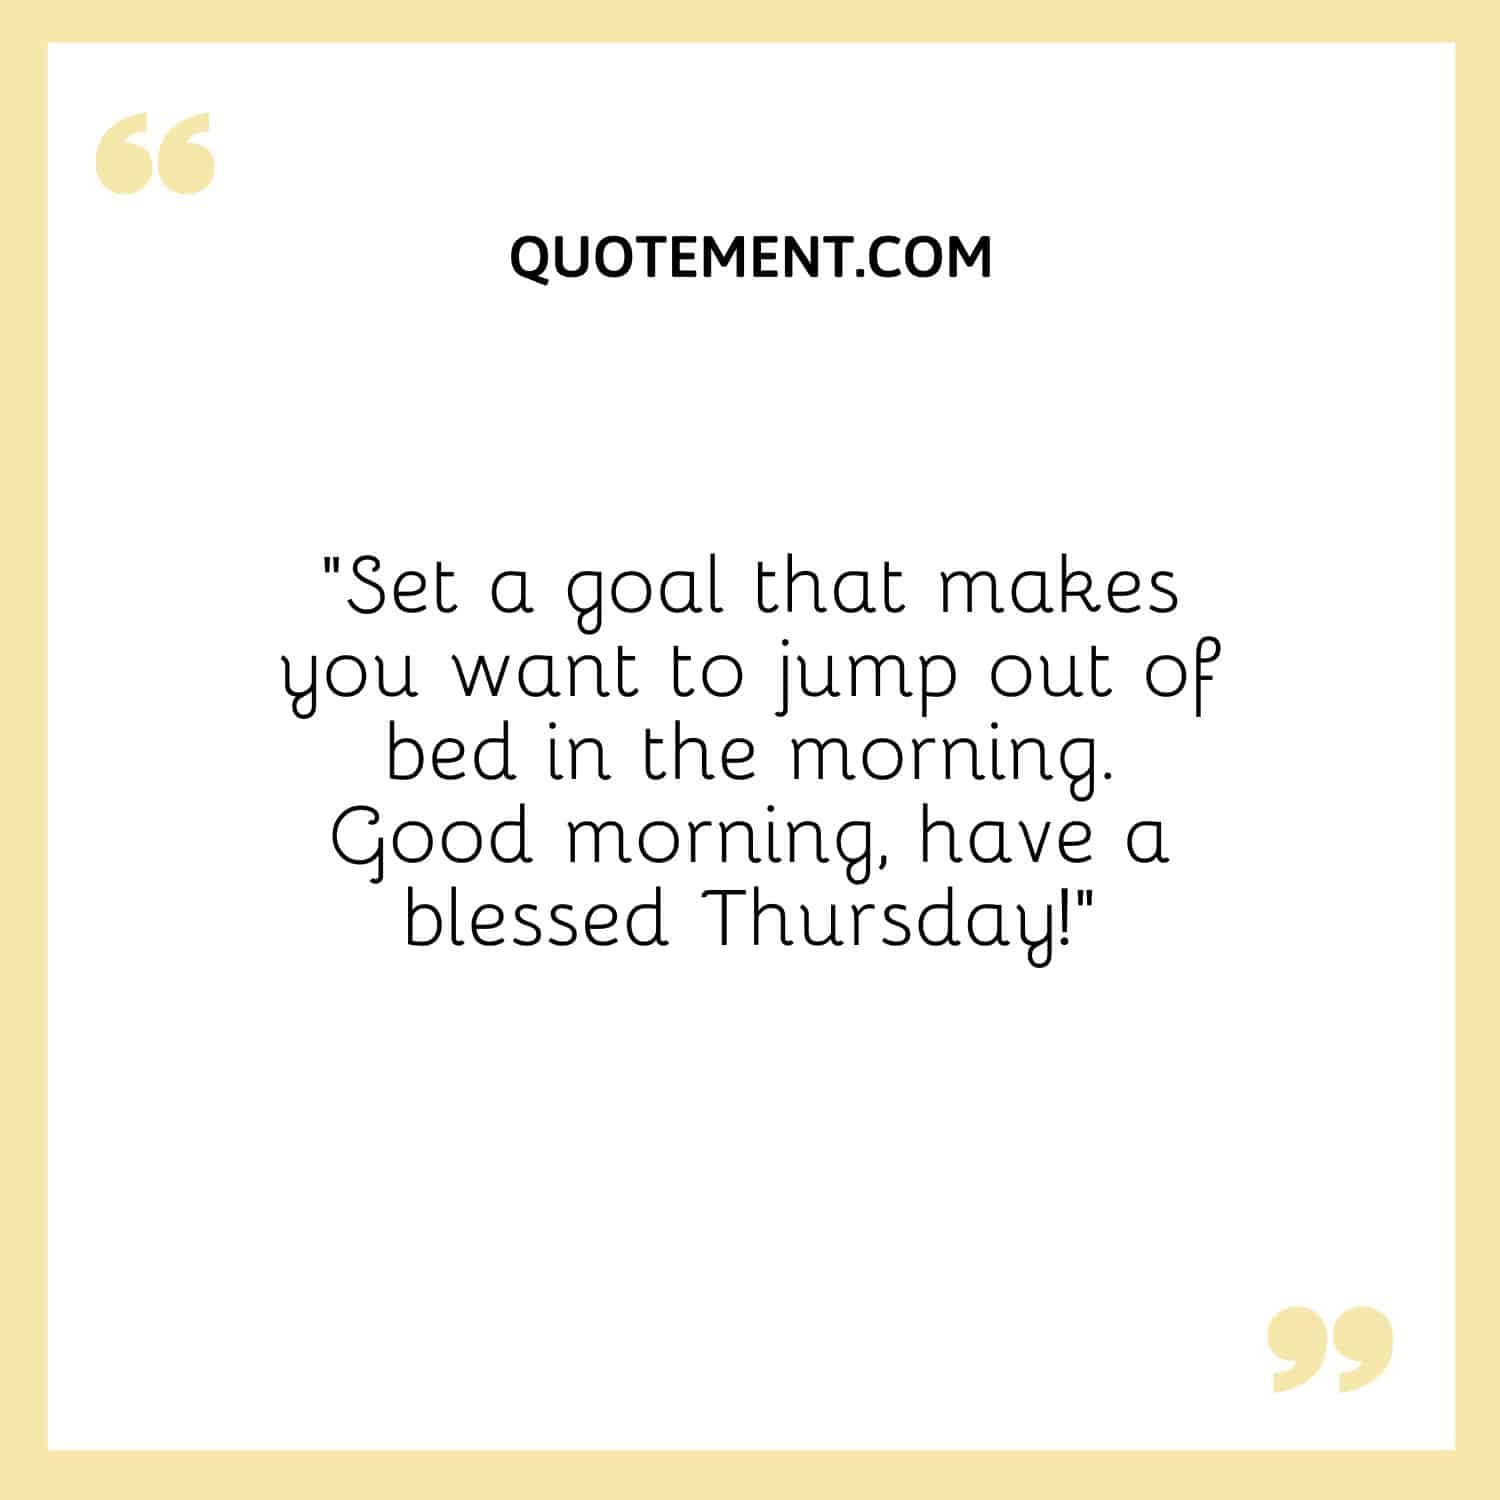 “Set a goal that makes you want to jump out of bed in the morning. Good morning, have a blessed Thursday!”